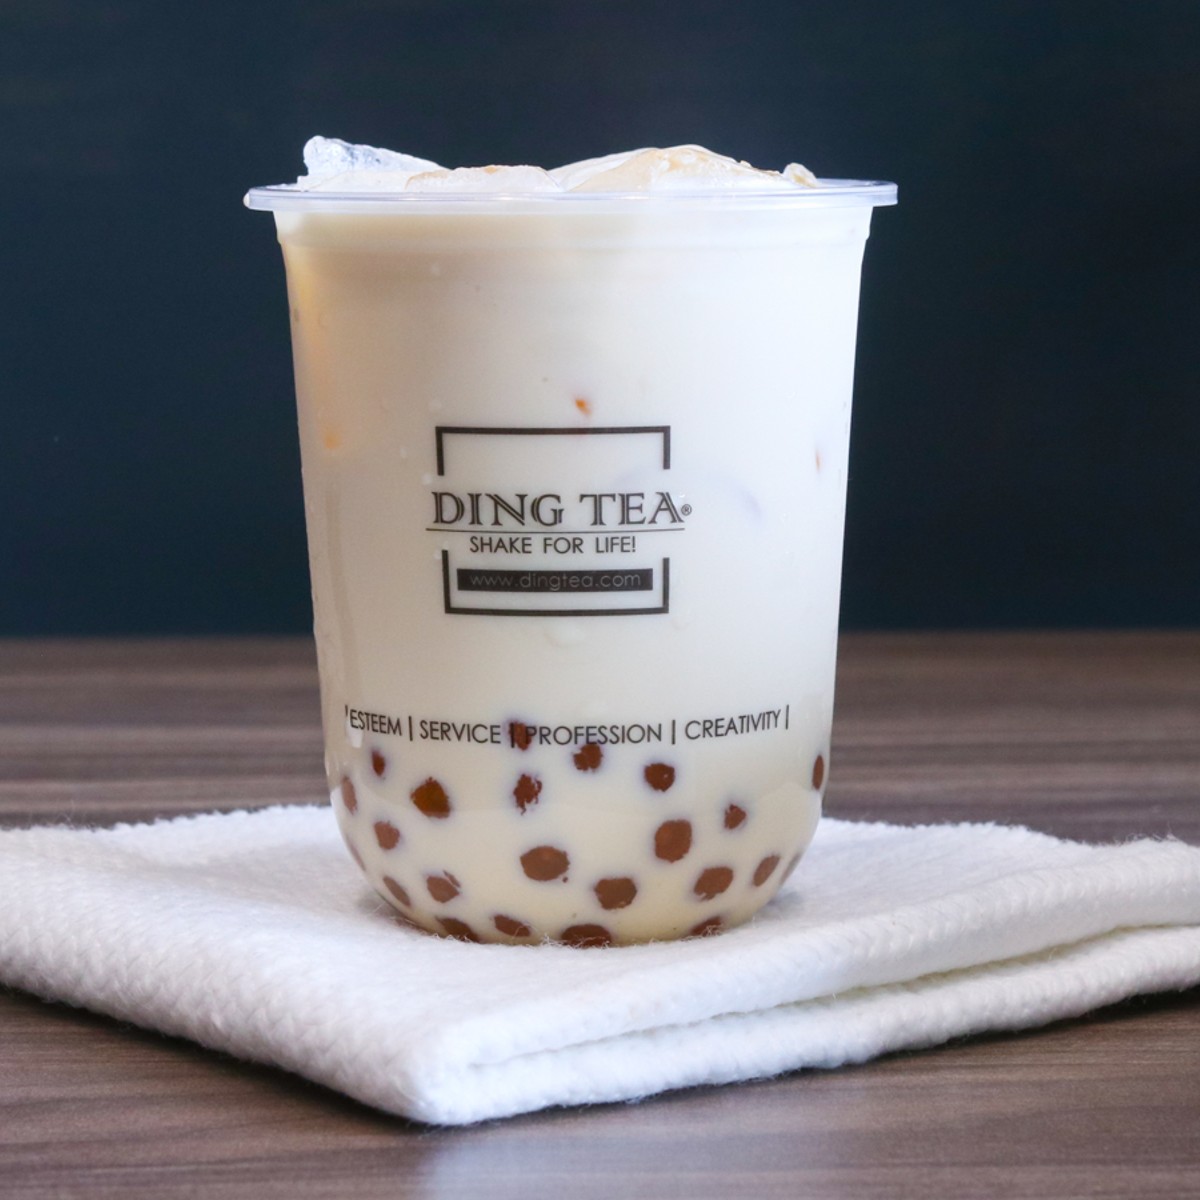 Taiwanese Boba Favorite Ding Tea Will Open in Richardson - Eater